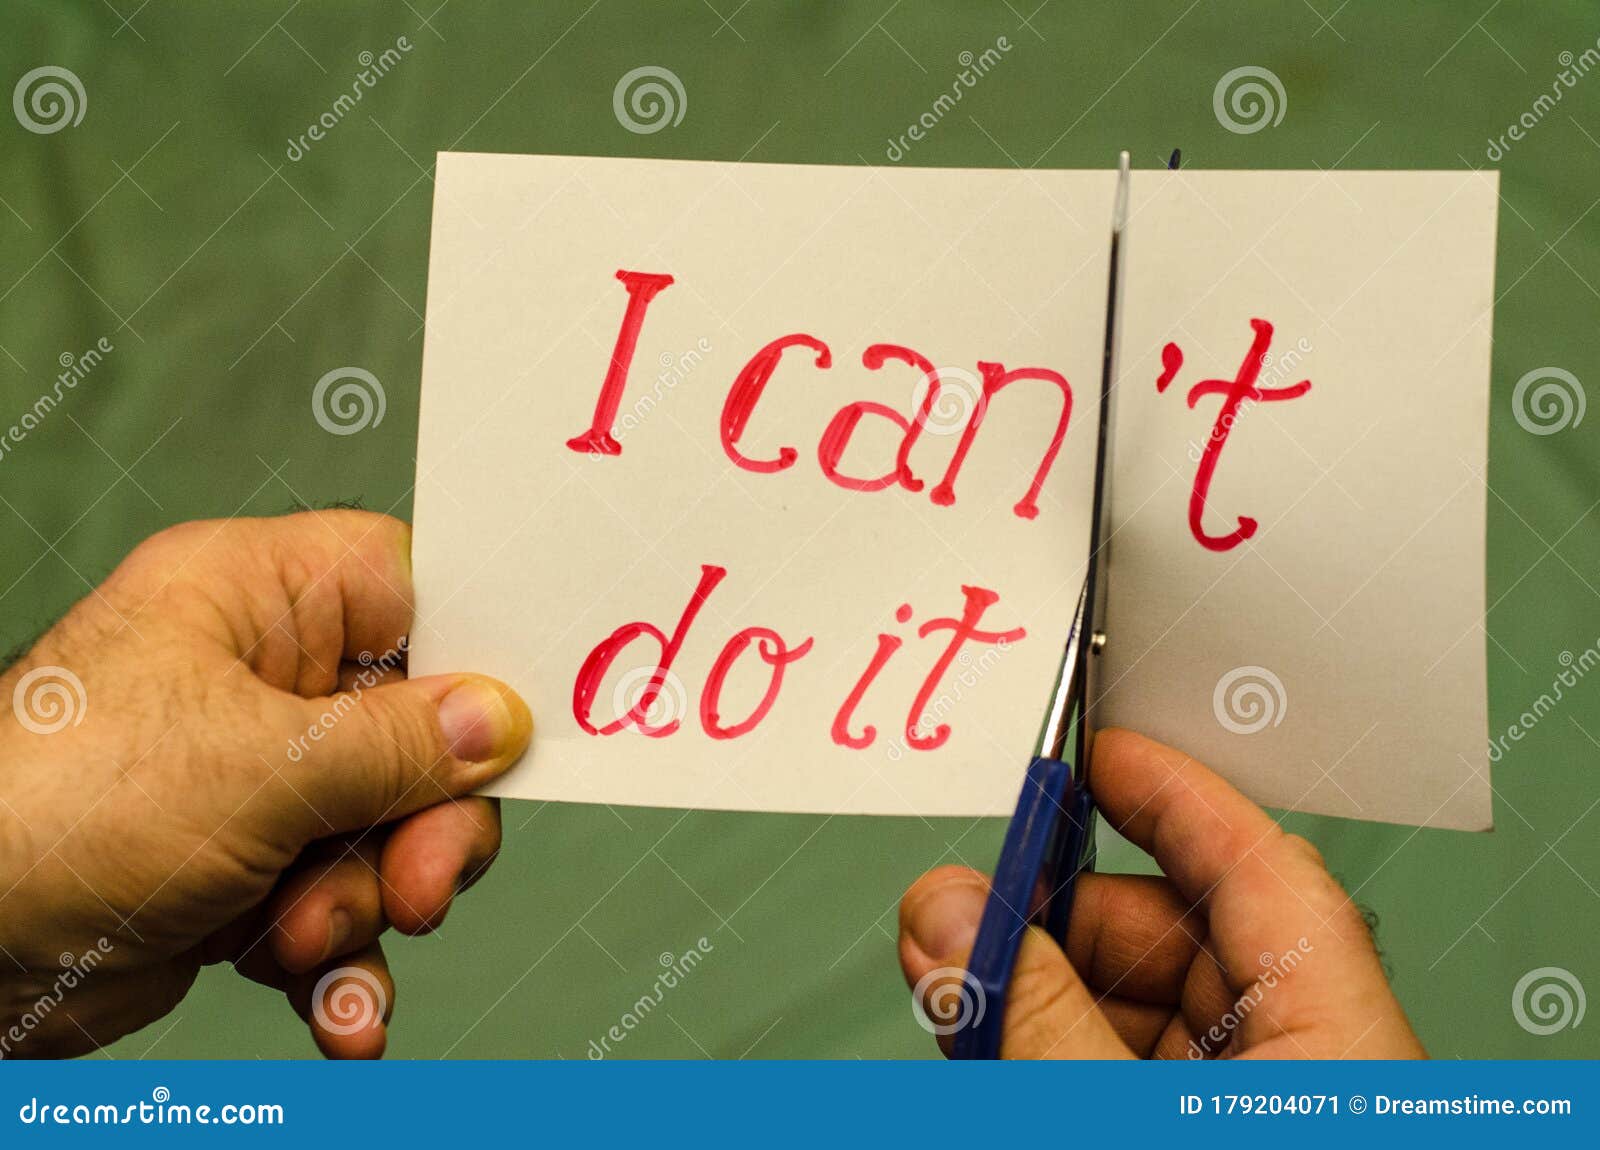 Man Using Scissors To Remove The Word Can T To Read I Can Do It Stock Image Image Of Encouragement Motivate